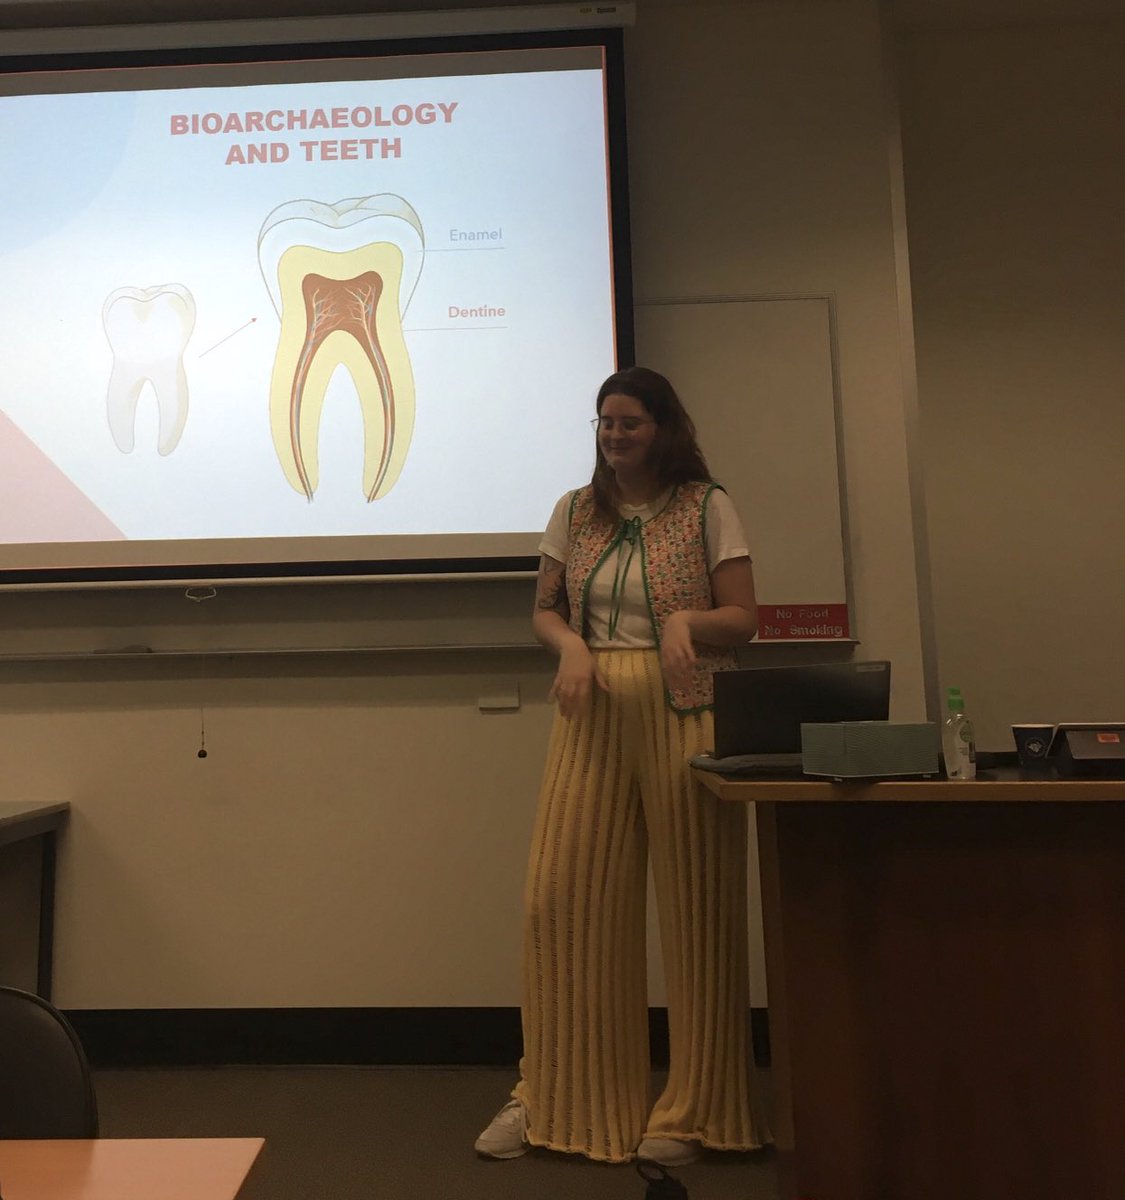 Congratulations ⁦@emma_sudron⁩ for both passing your thesis prospectus defense & for stellar #SciComm fashion! Emma knitted her own tooth root pants while prepping a solid talk about i#bioarchaeology research with #teeth!  ⁦@GU_SocialCultur⁩ & ⁦@ARCHE_Griffith⁩